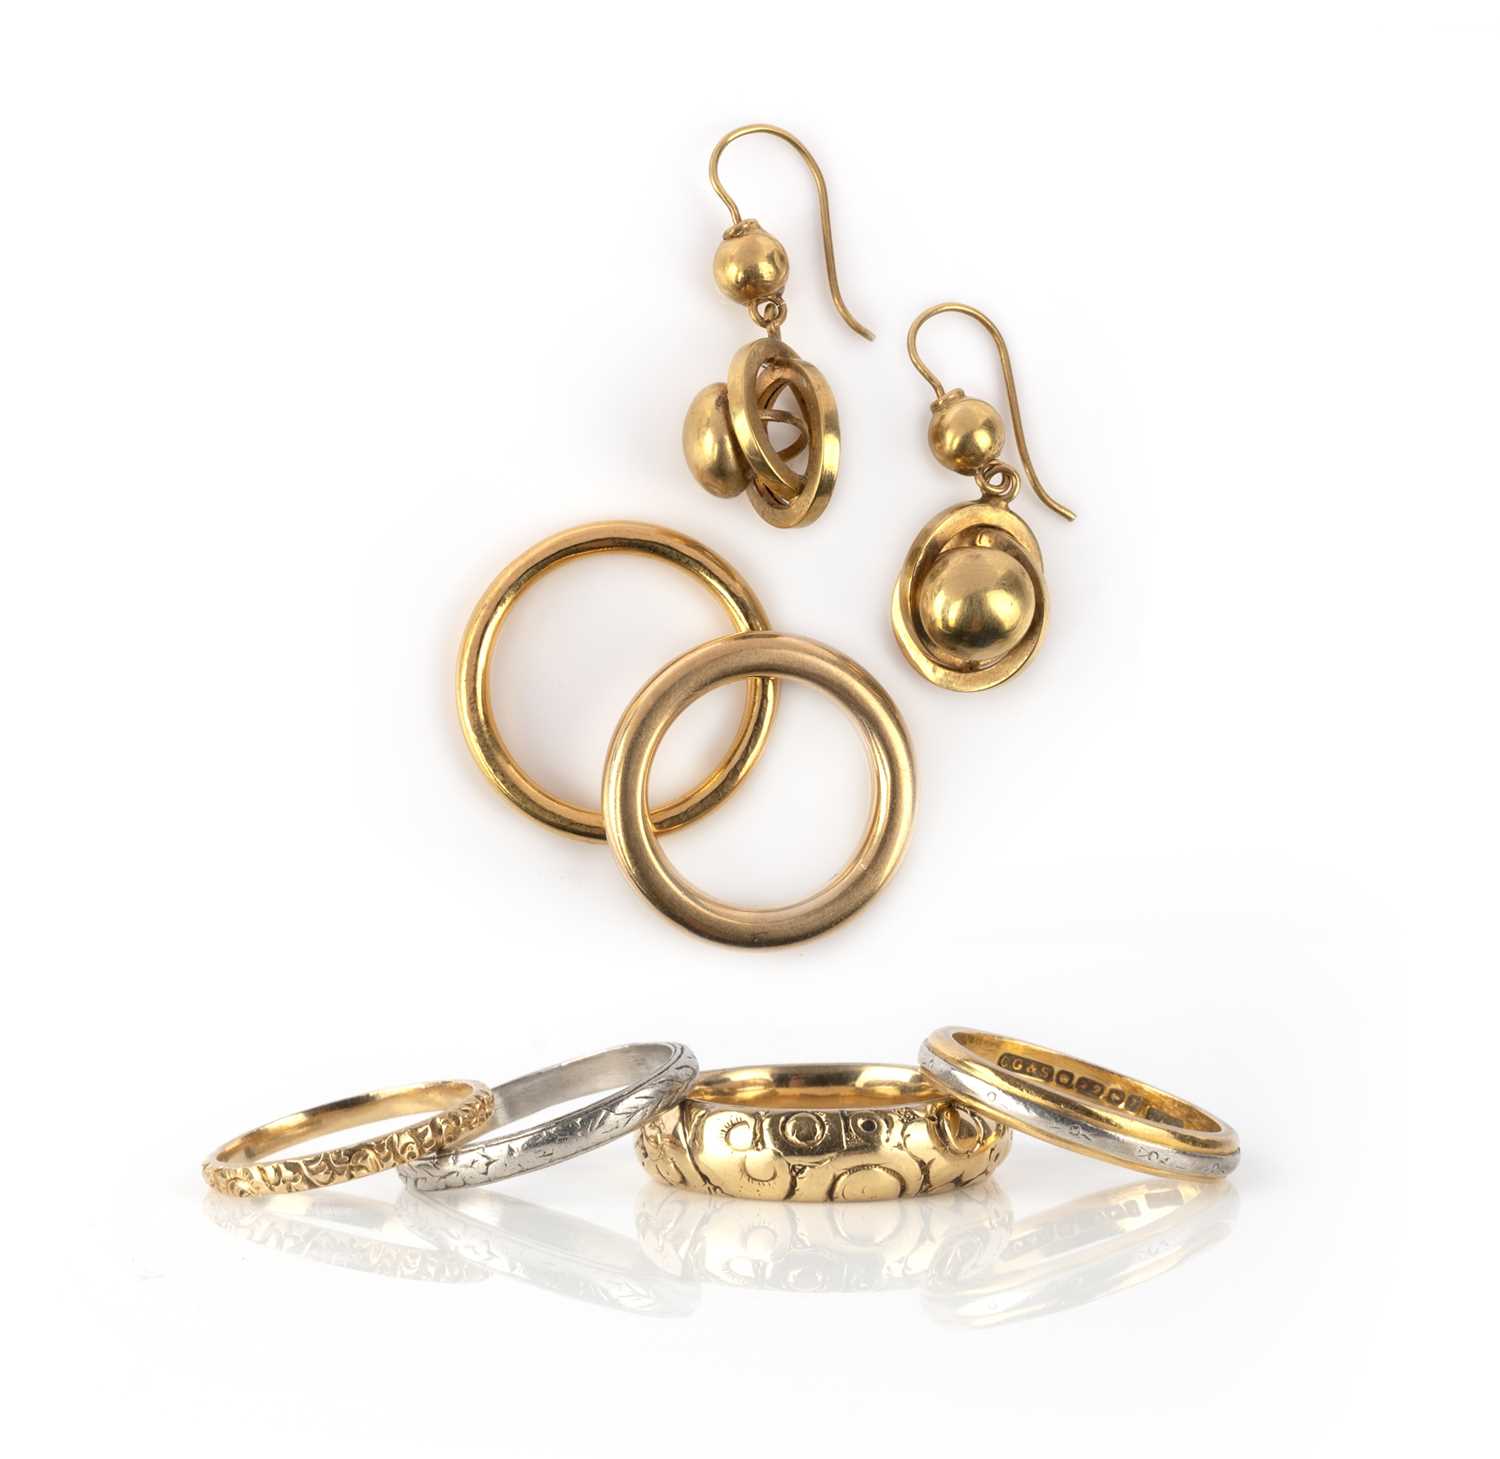 Six wedding bands and a pair of earrings, 19th and early 20th century, comprising: two gold bands